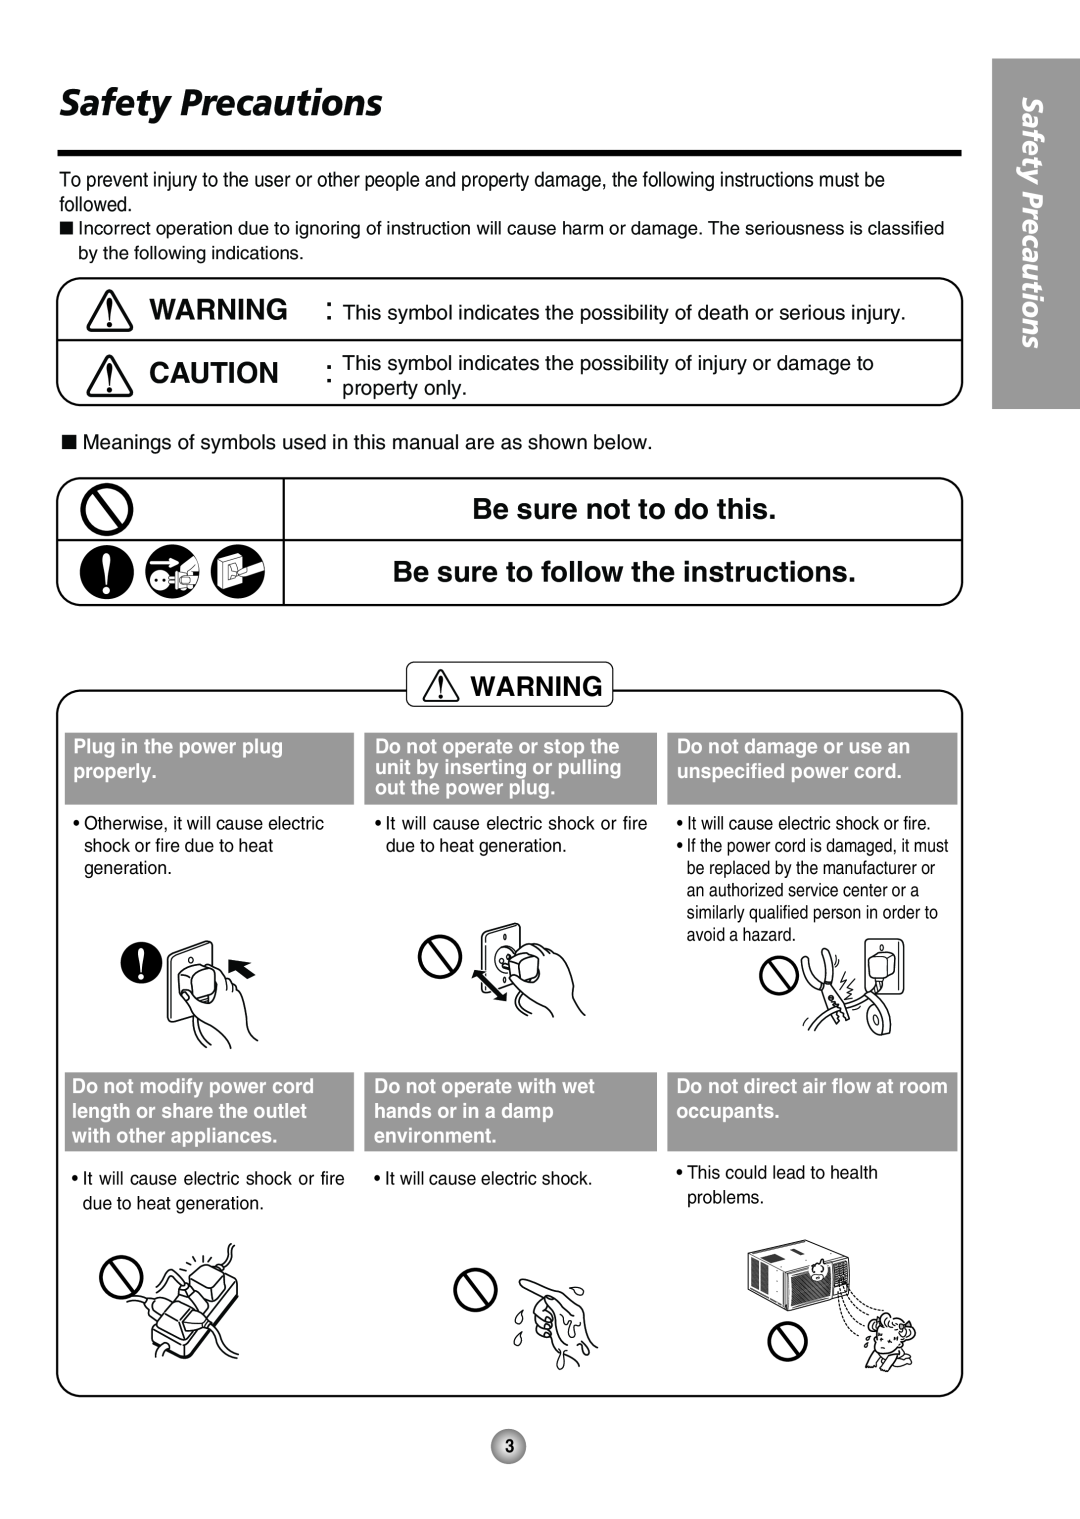 Panasonic CW-XC85HU Safety Precautions, Be sure not to do this, Be sure to follow the instructions, hands or in a damp 